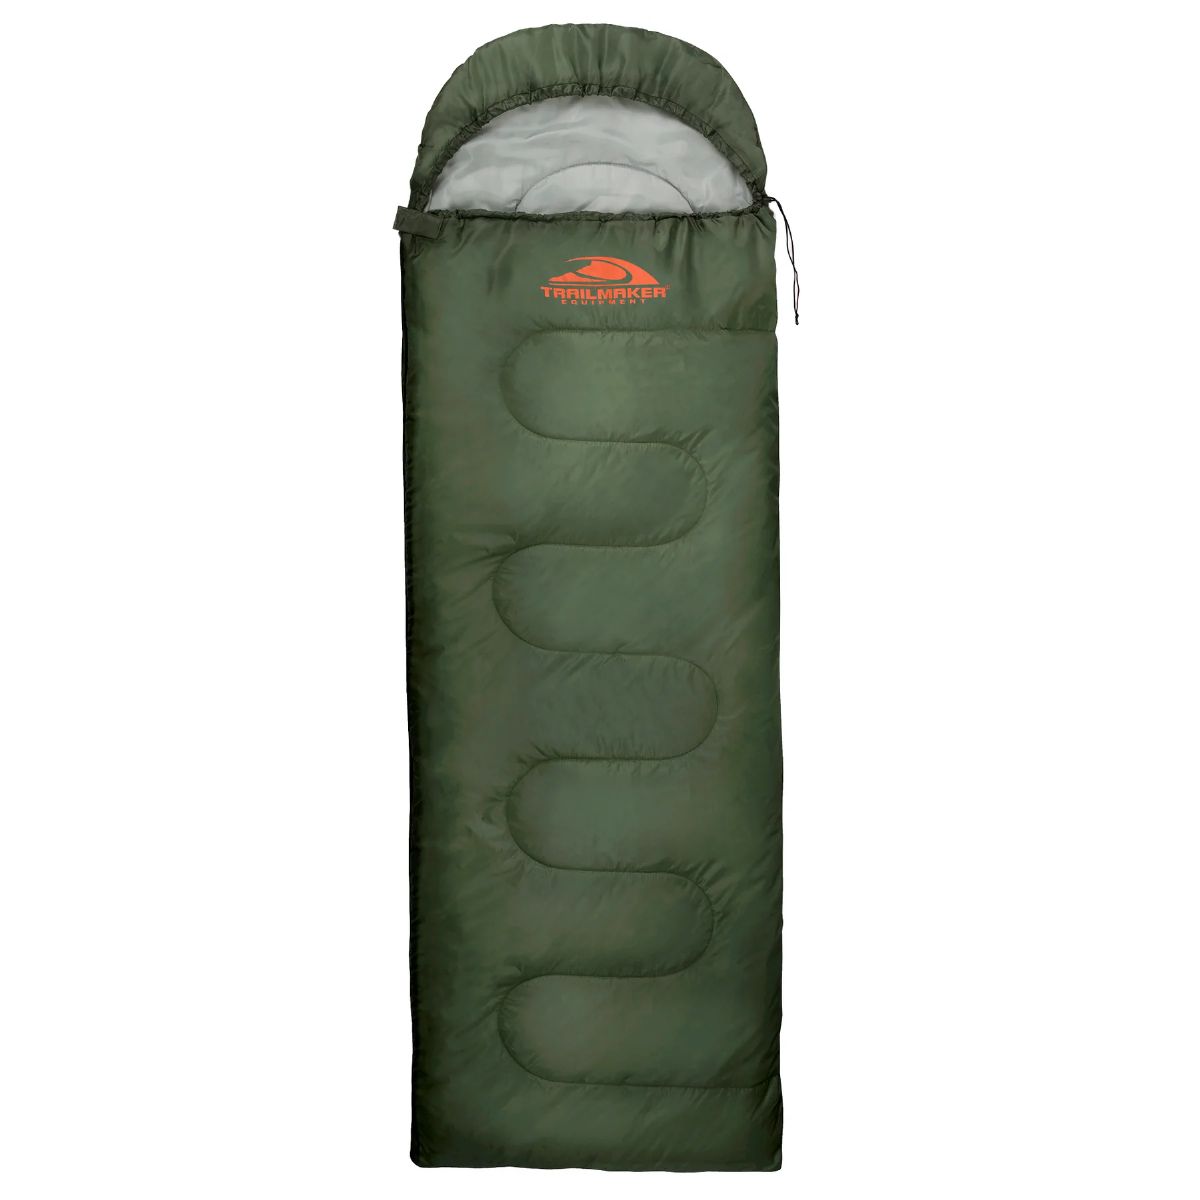 10 Pieces of Waterproof Cold Weather Sleeping Bags - 30f Green